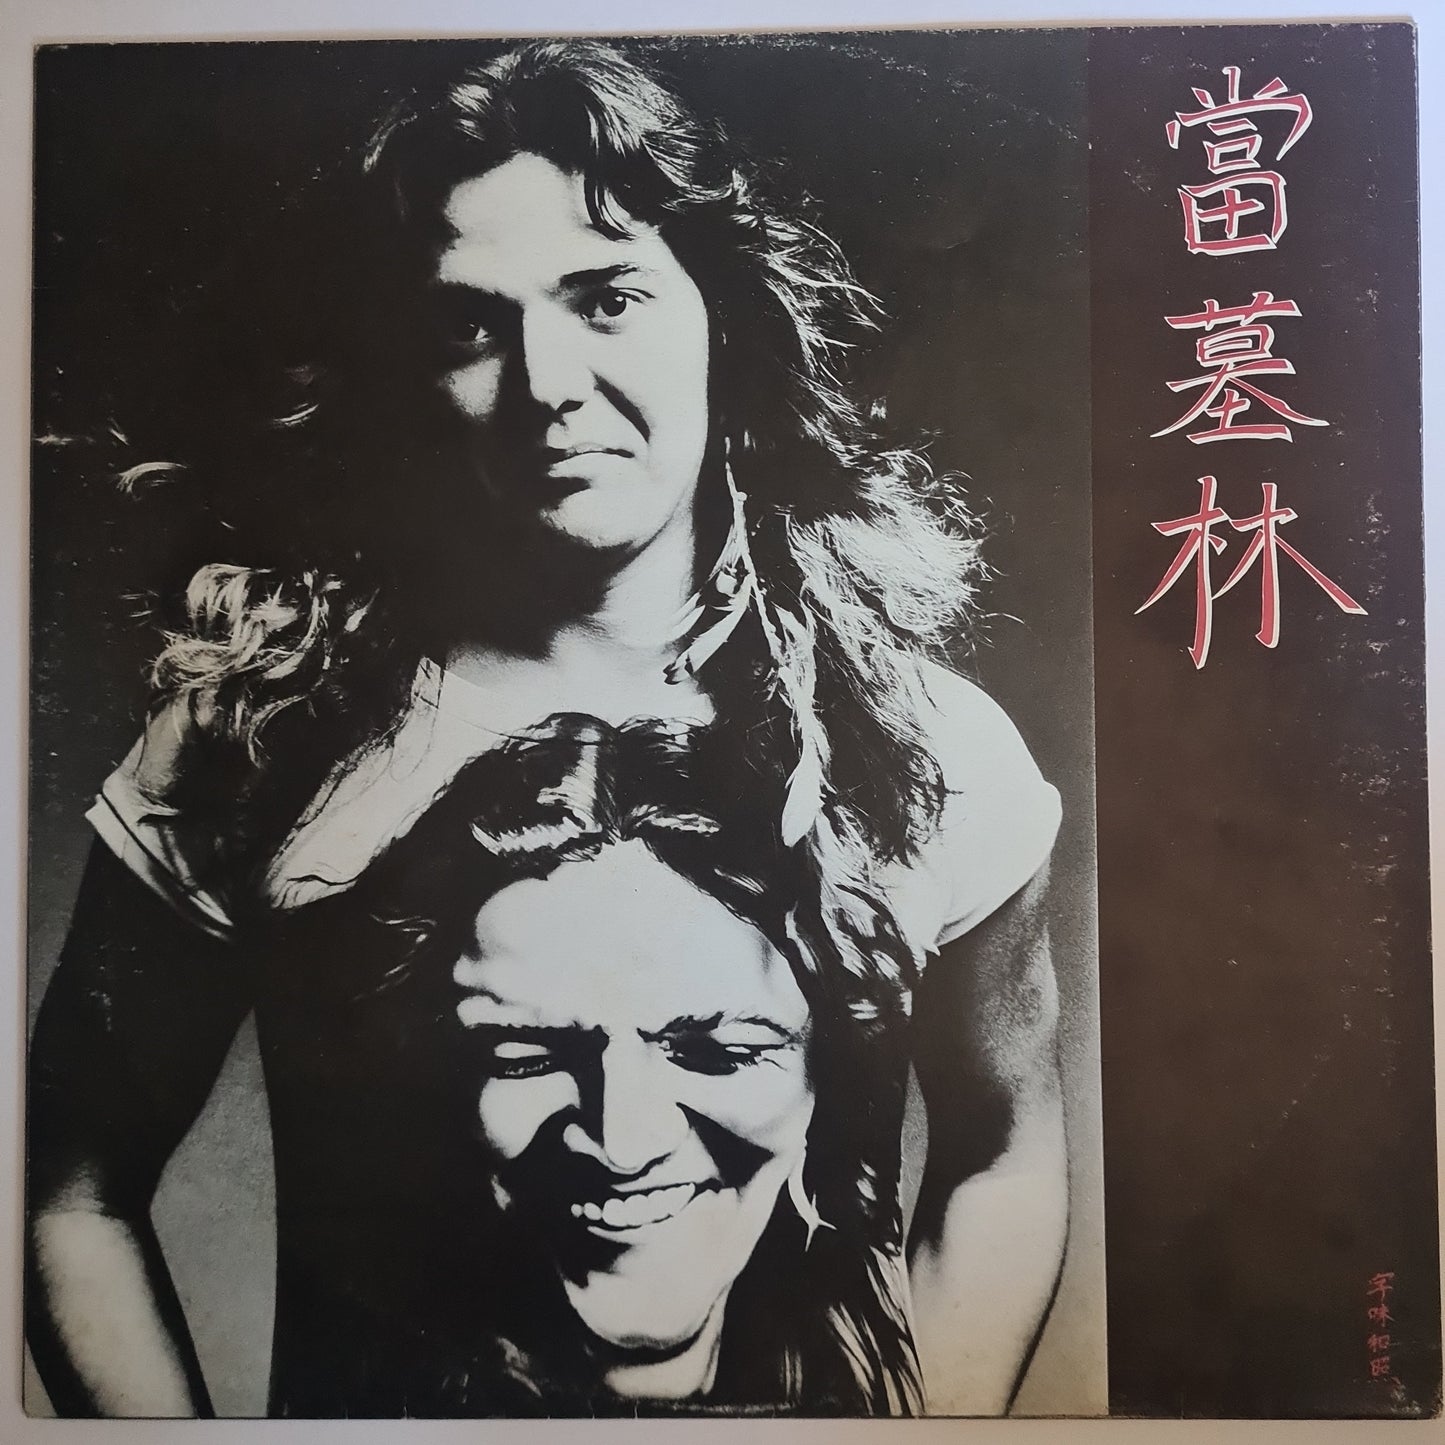 Tommy Bolin (Deep Purple) – Private Eyes - 1976 - Vinyl Record